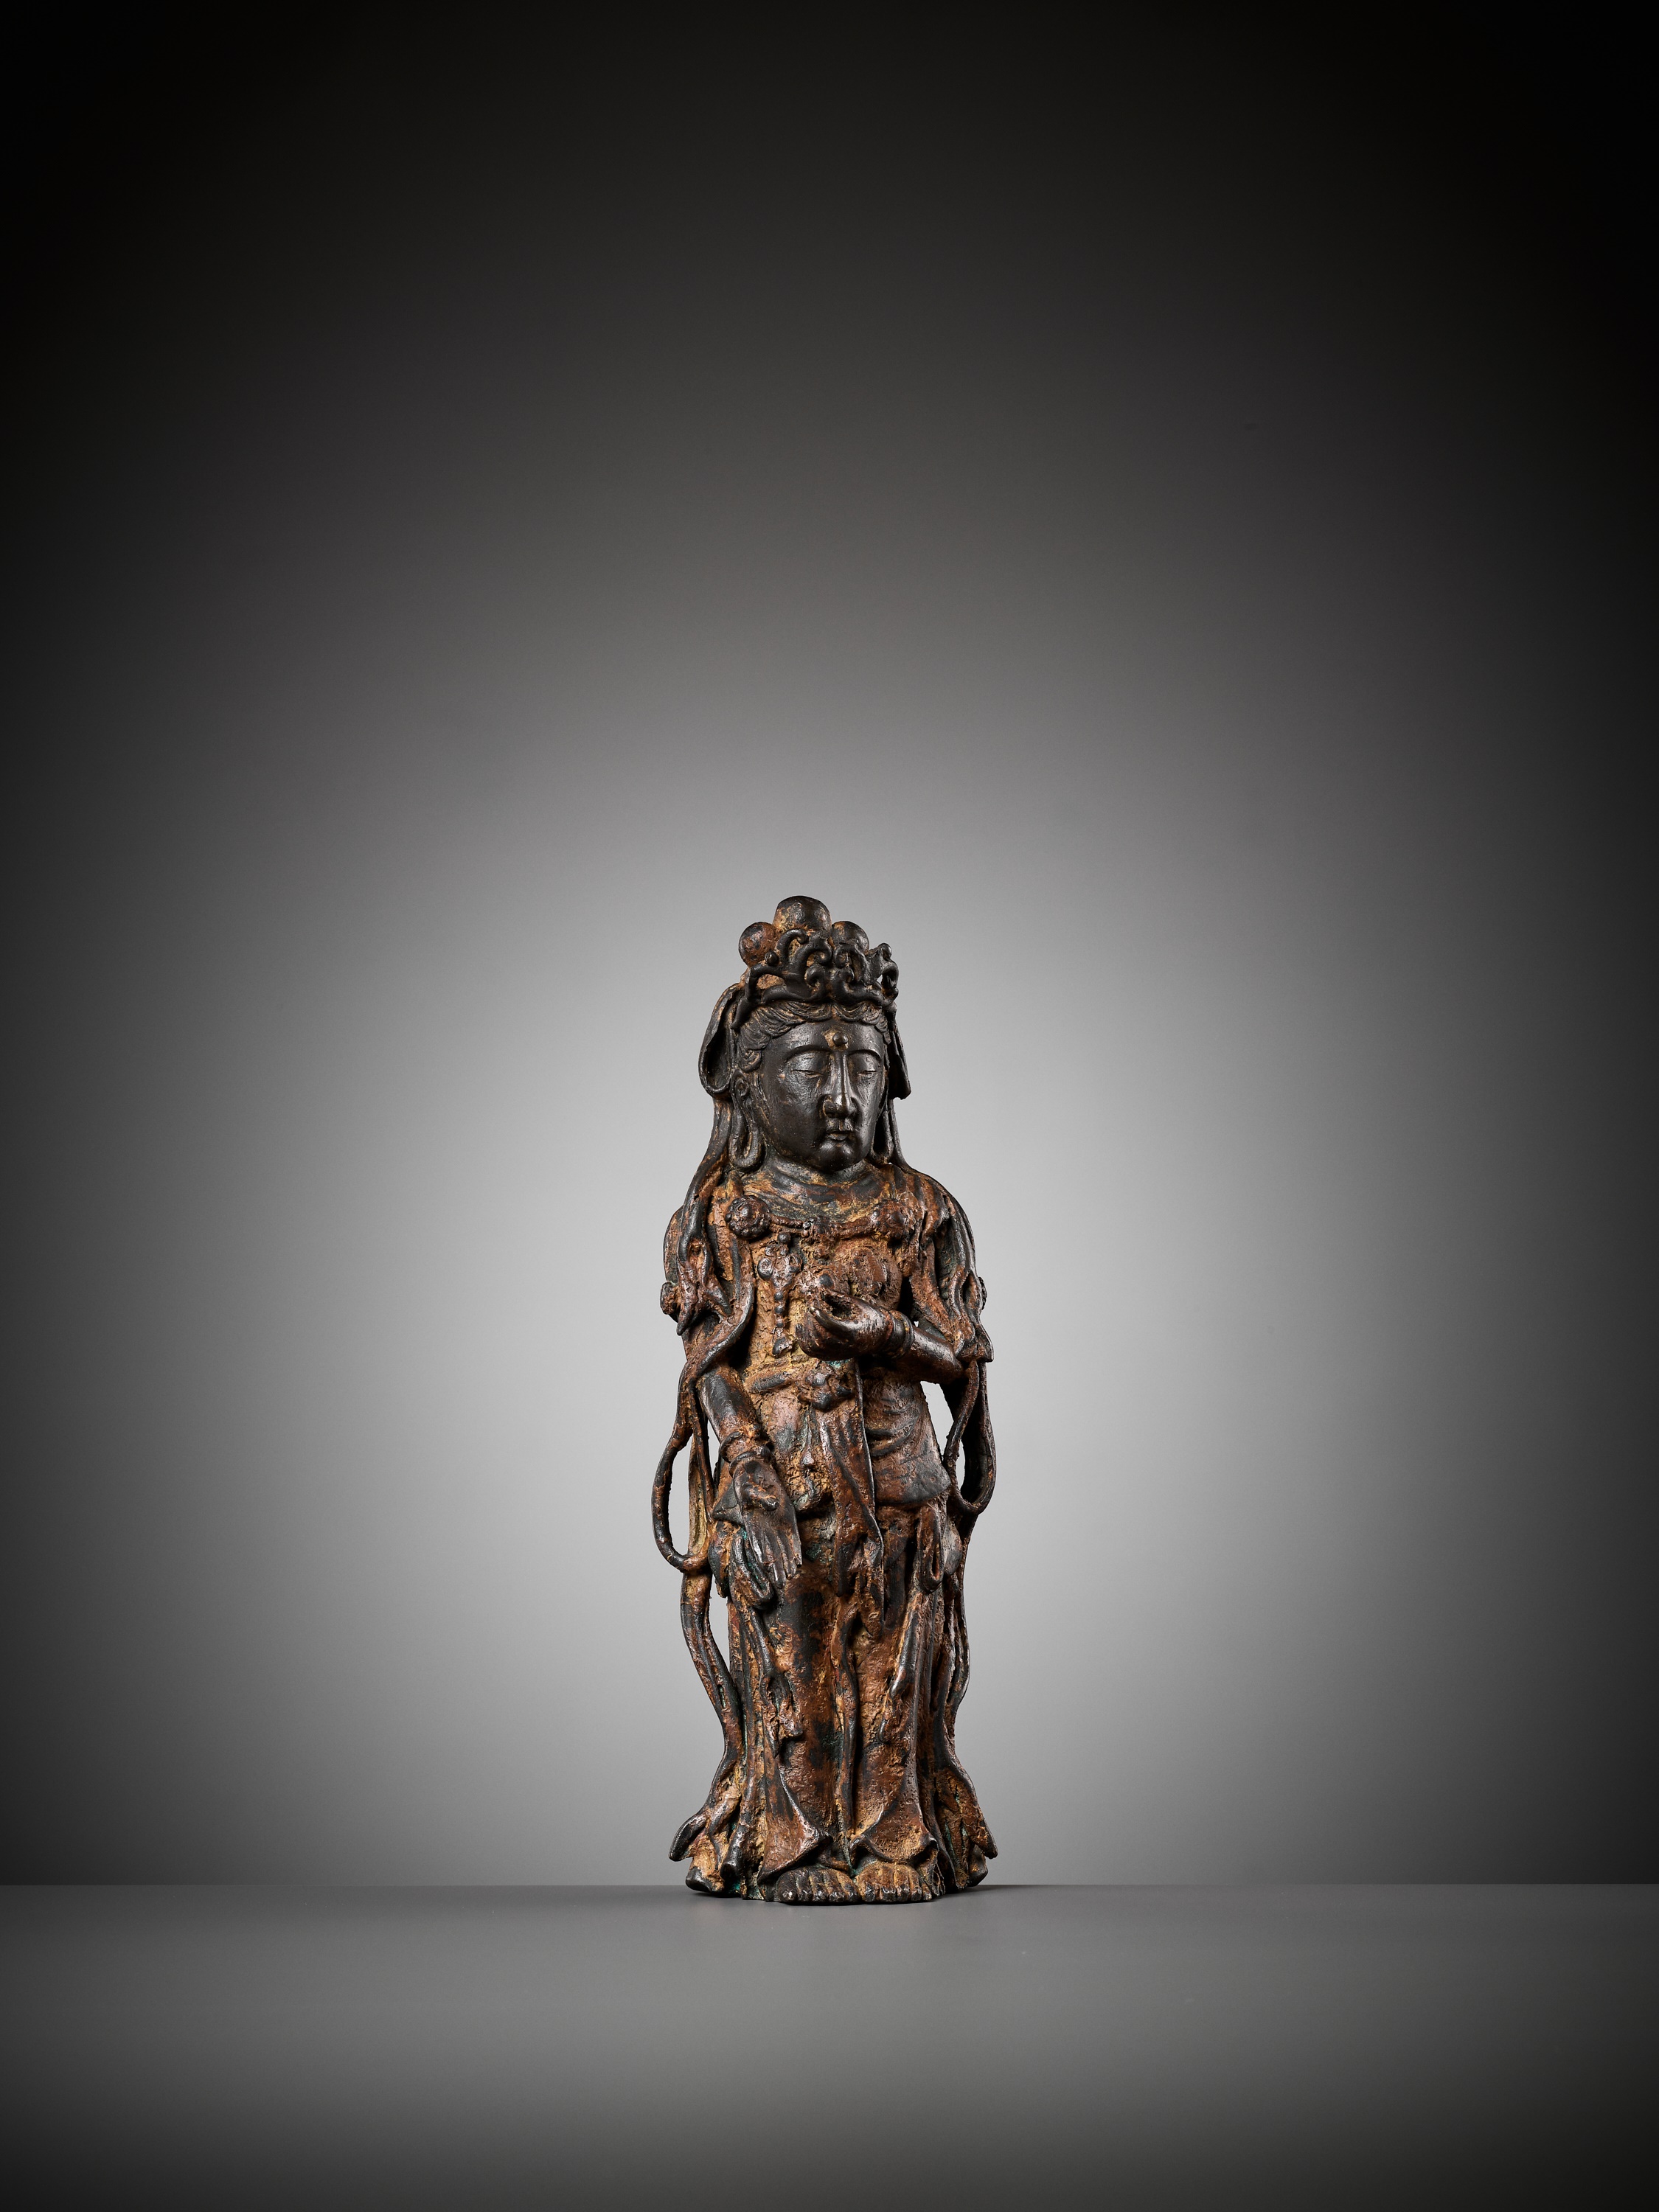 AN EXCEEDINGLY RARE BRONZE FIGURE OF GUANYIN, DALI KINGDOM, 12TH - MID-13TH CENTURY - Image 13 of 20